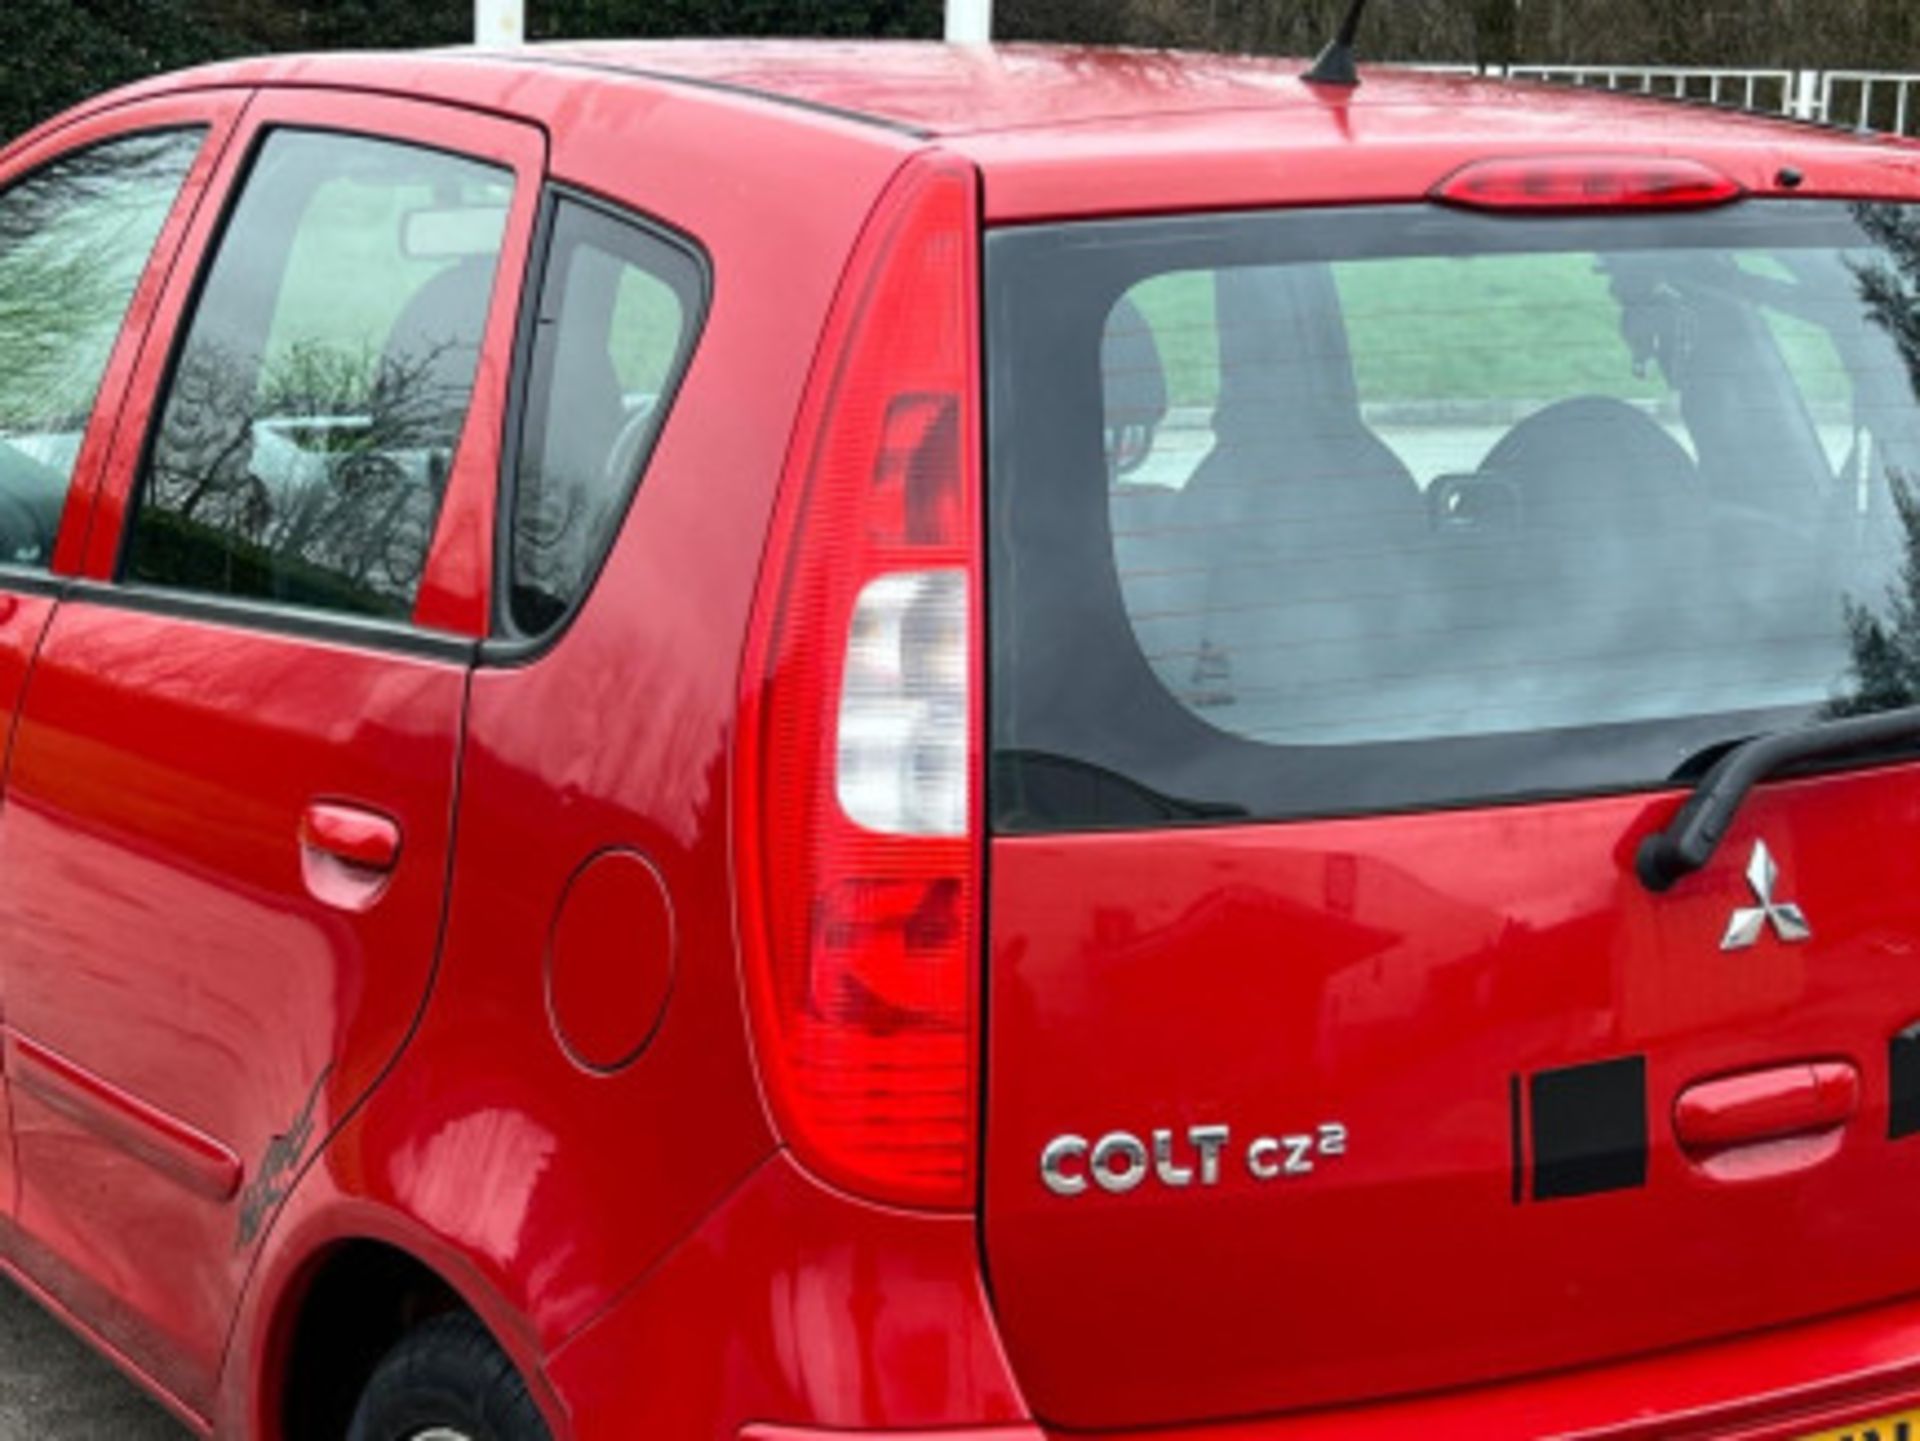 2007 MITSUBISHI COLT 1.5 DI-D DIESEL AUTOMATIC >>--NO VAT ON HAMMER--<< - Image 51 of 127